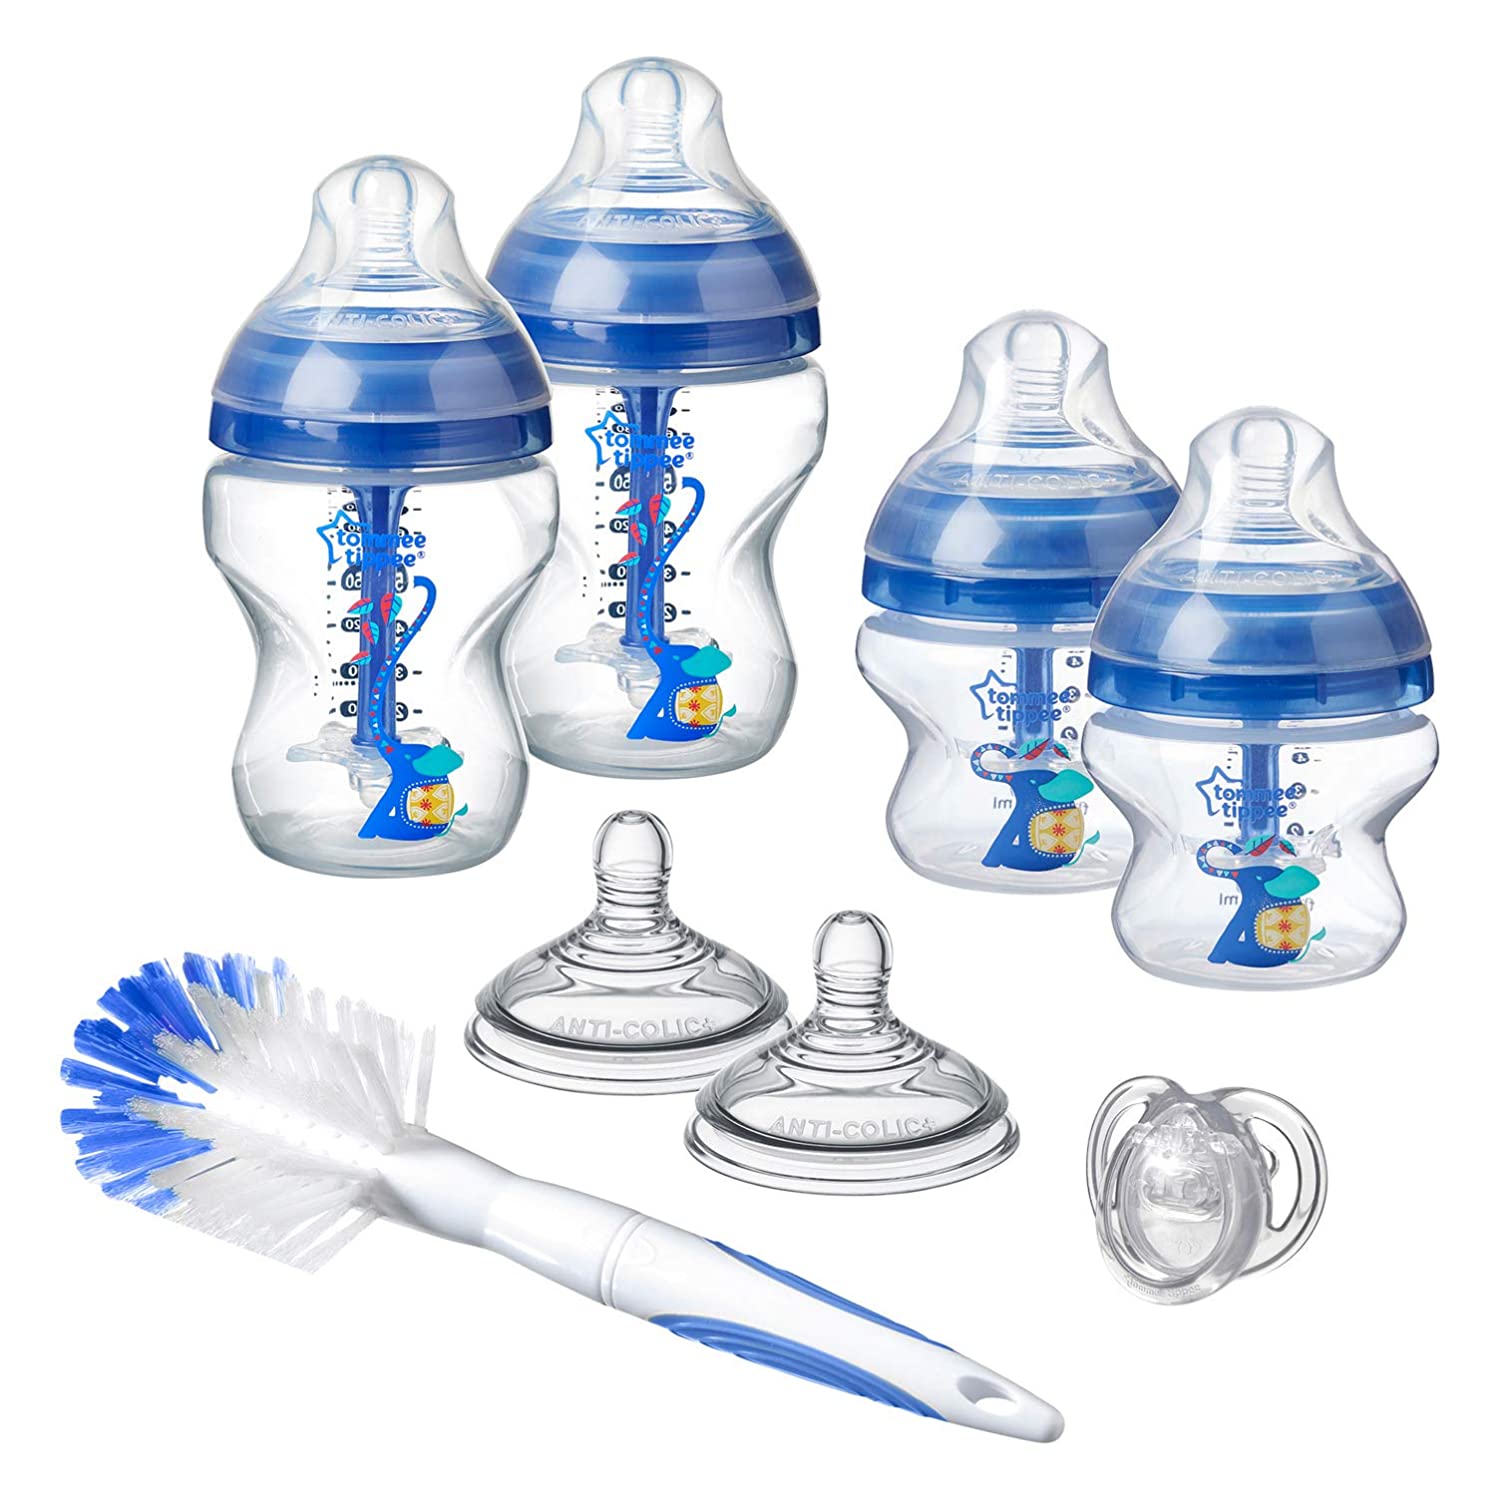 Tommee Tippee 422712 Advanced-Anti-Colic Baby Bottle Starter Set for Newborns Blue